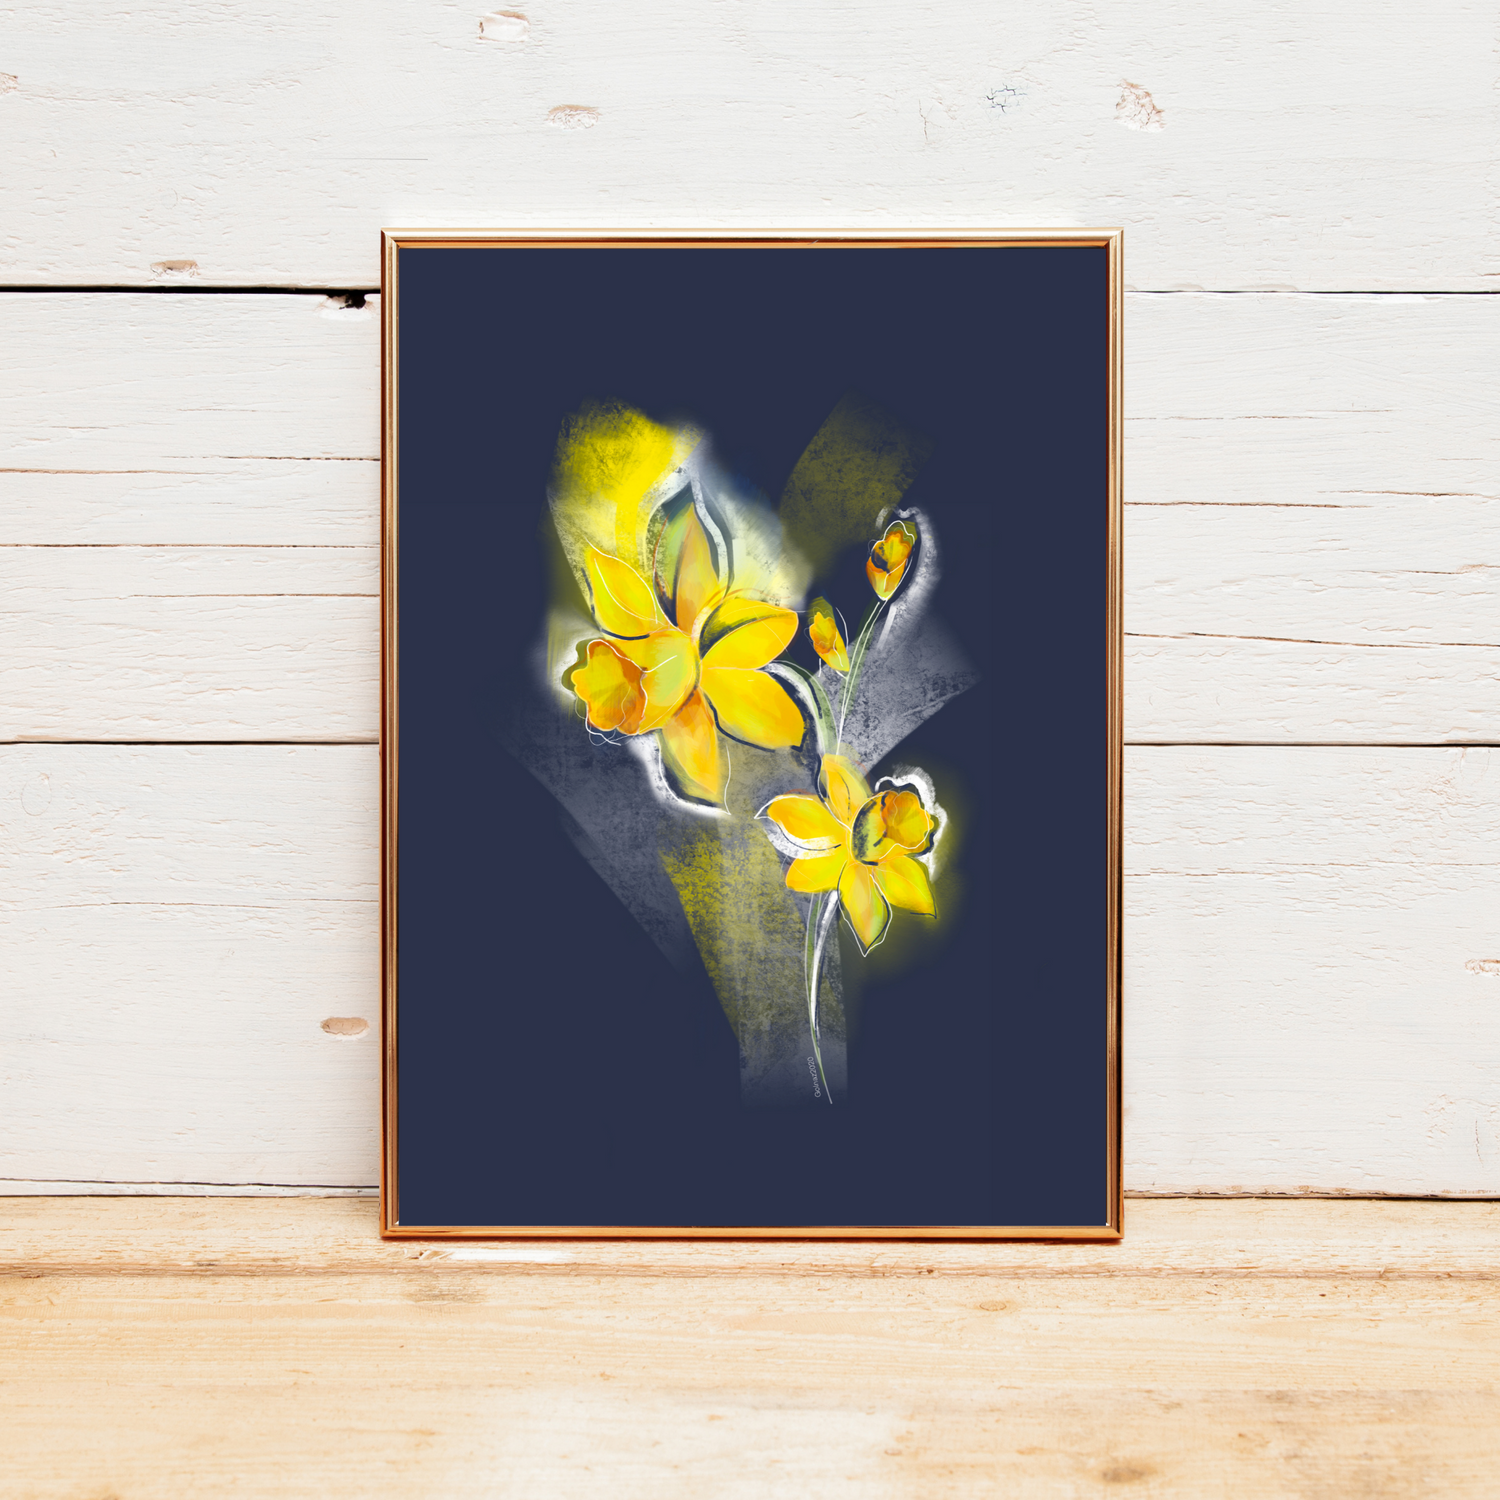 The Daffodil painting by ArisaTeam